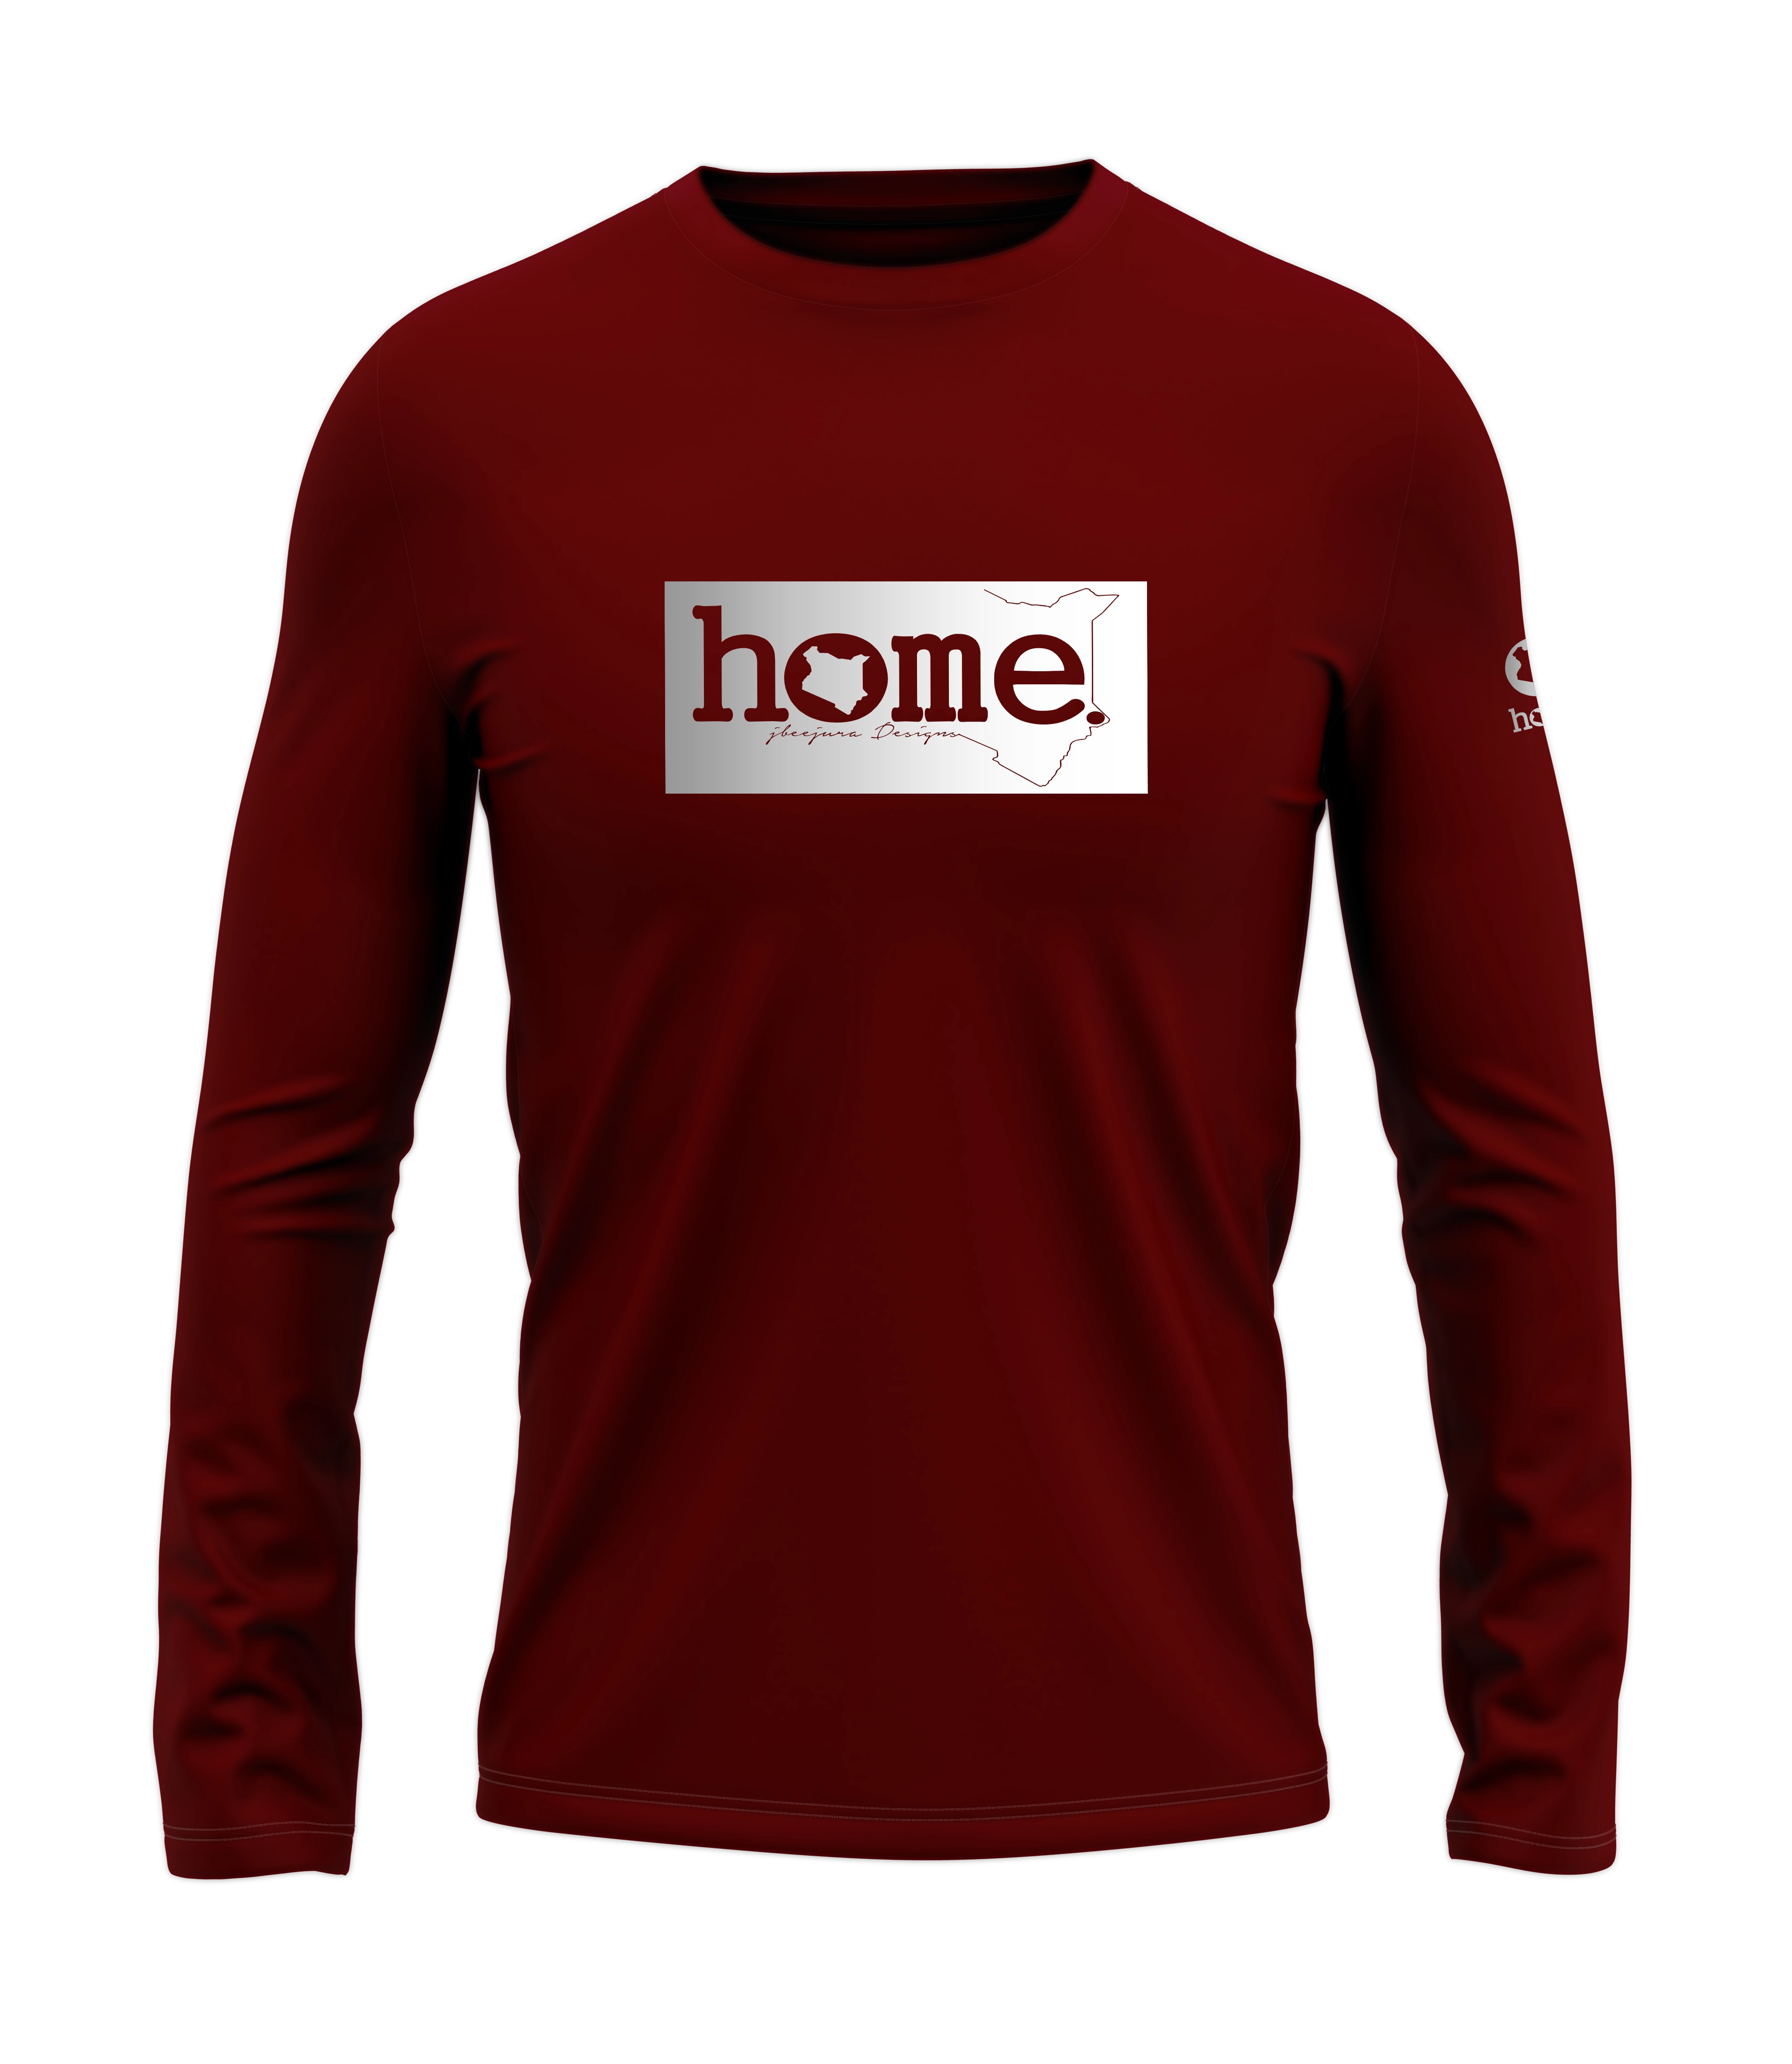 home_254 LONG-SLEEVED MAROON RED T-SHIRT WITH A SILVER CLASSIC PRINT – COTTON PLUS FABRIC